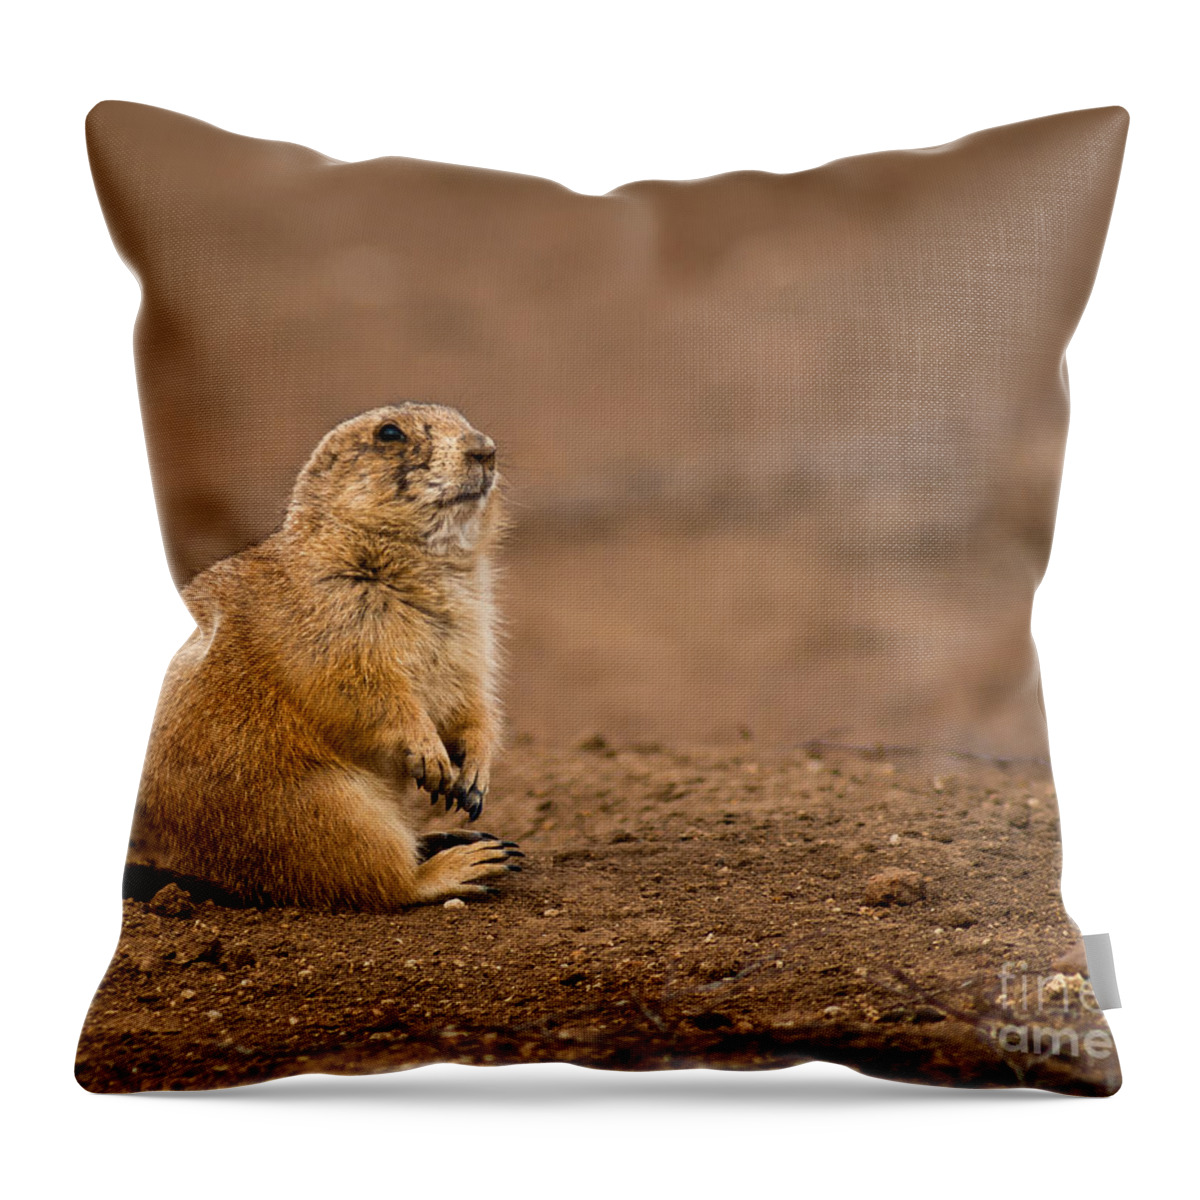 Animal Throw Pillow featuring the photograph Prairie Dog On Dirt by Robert Frederick